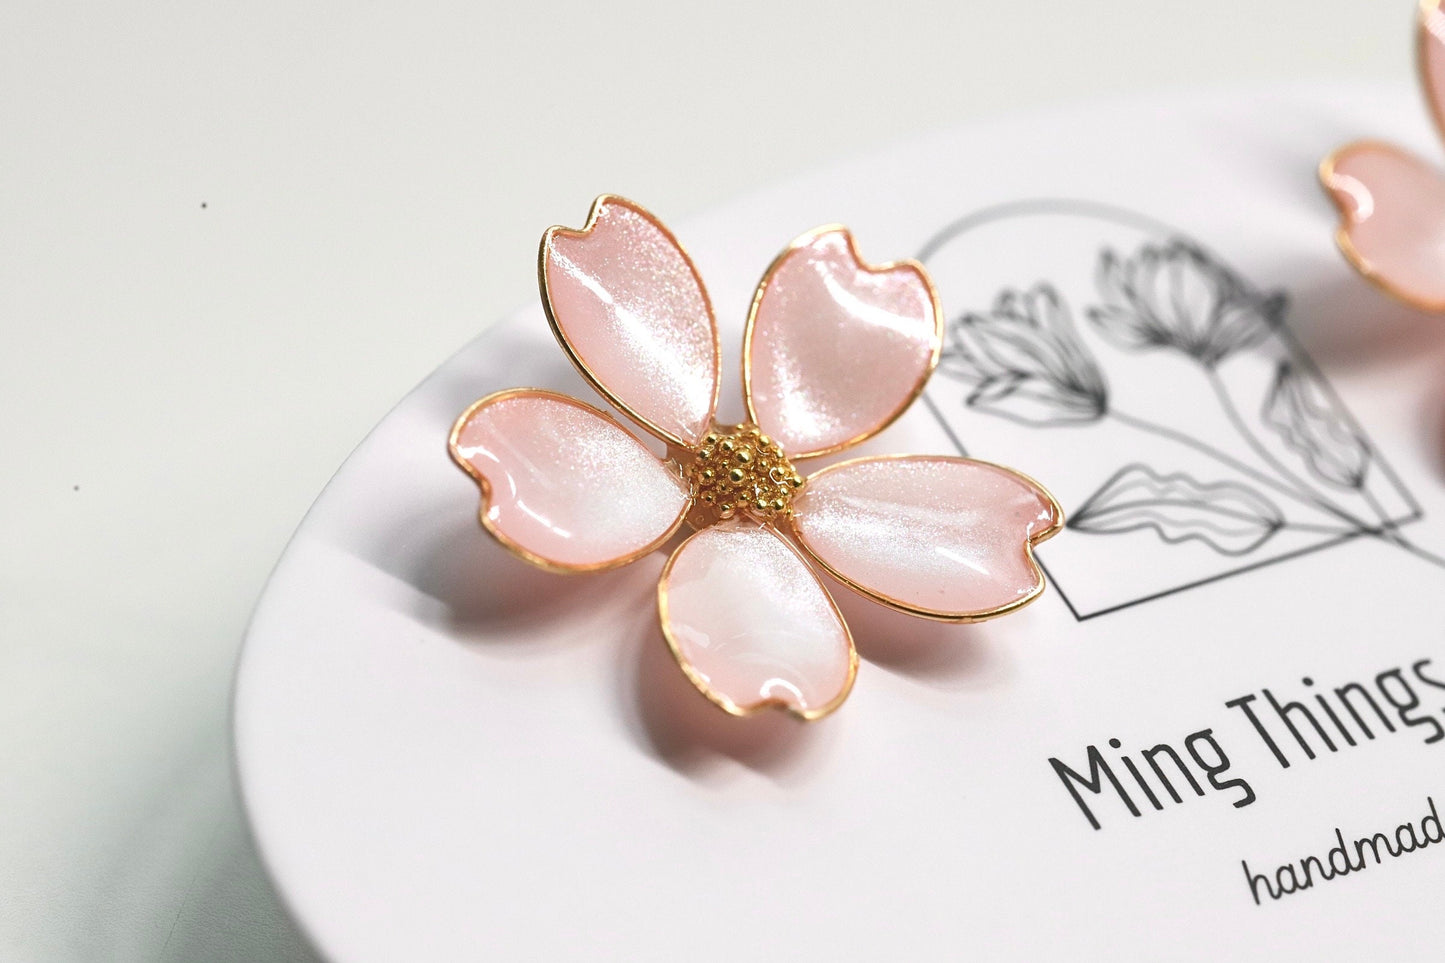 Handmade Wire Resin Cherry Blossom Stud Earrings, Spring Theme Floral Pearlescent Earrings, Romantic Pink Earrings